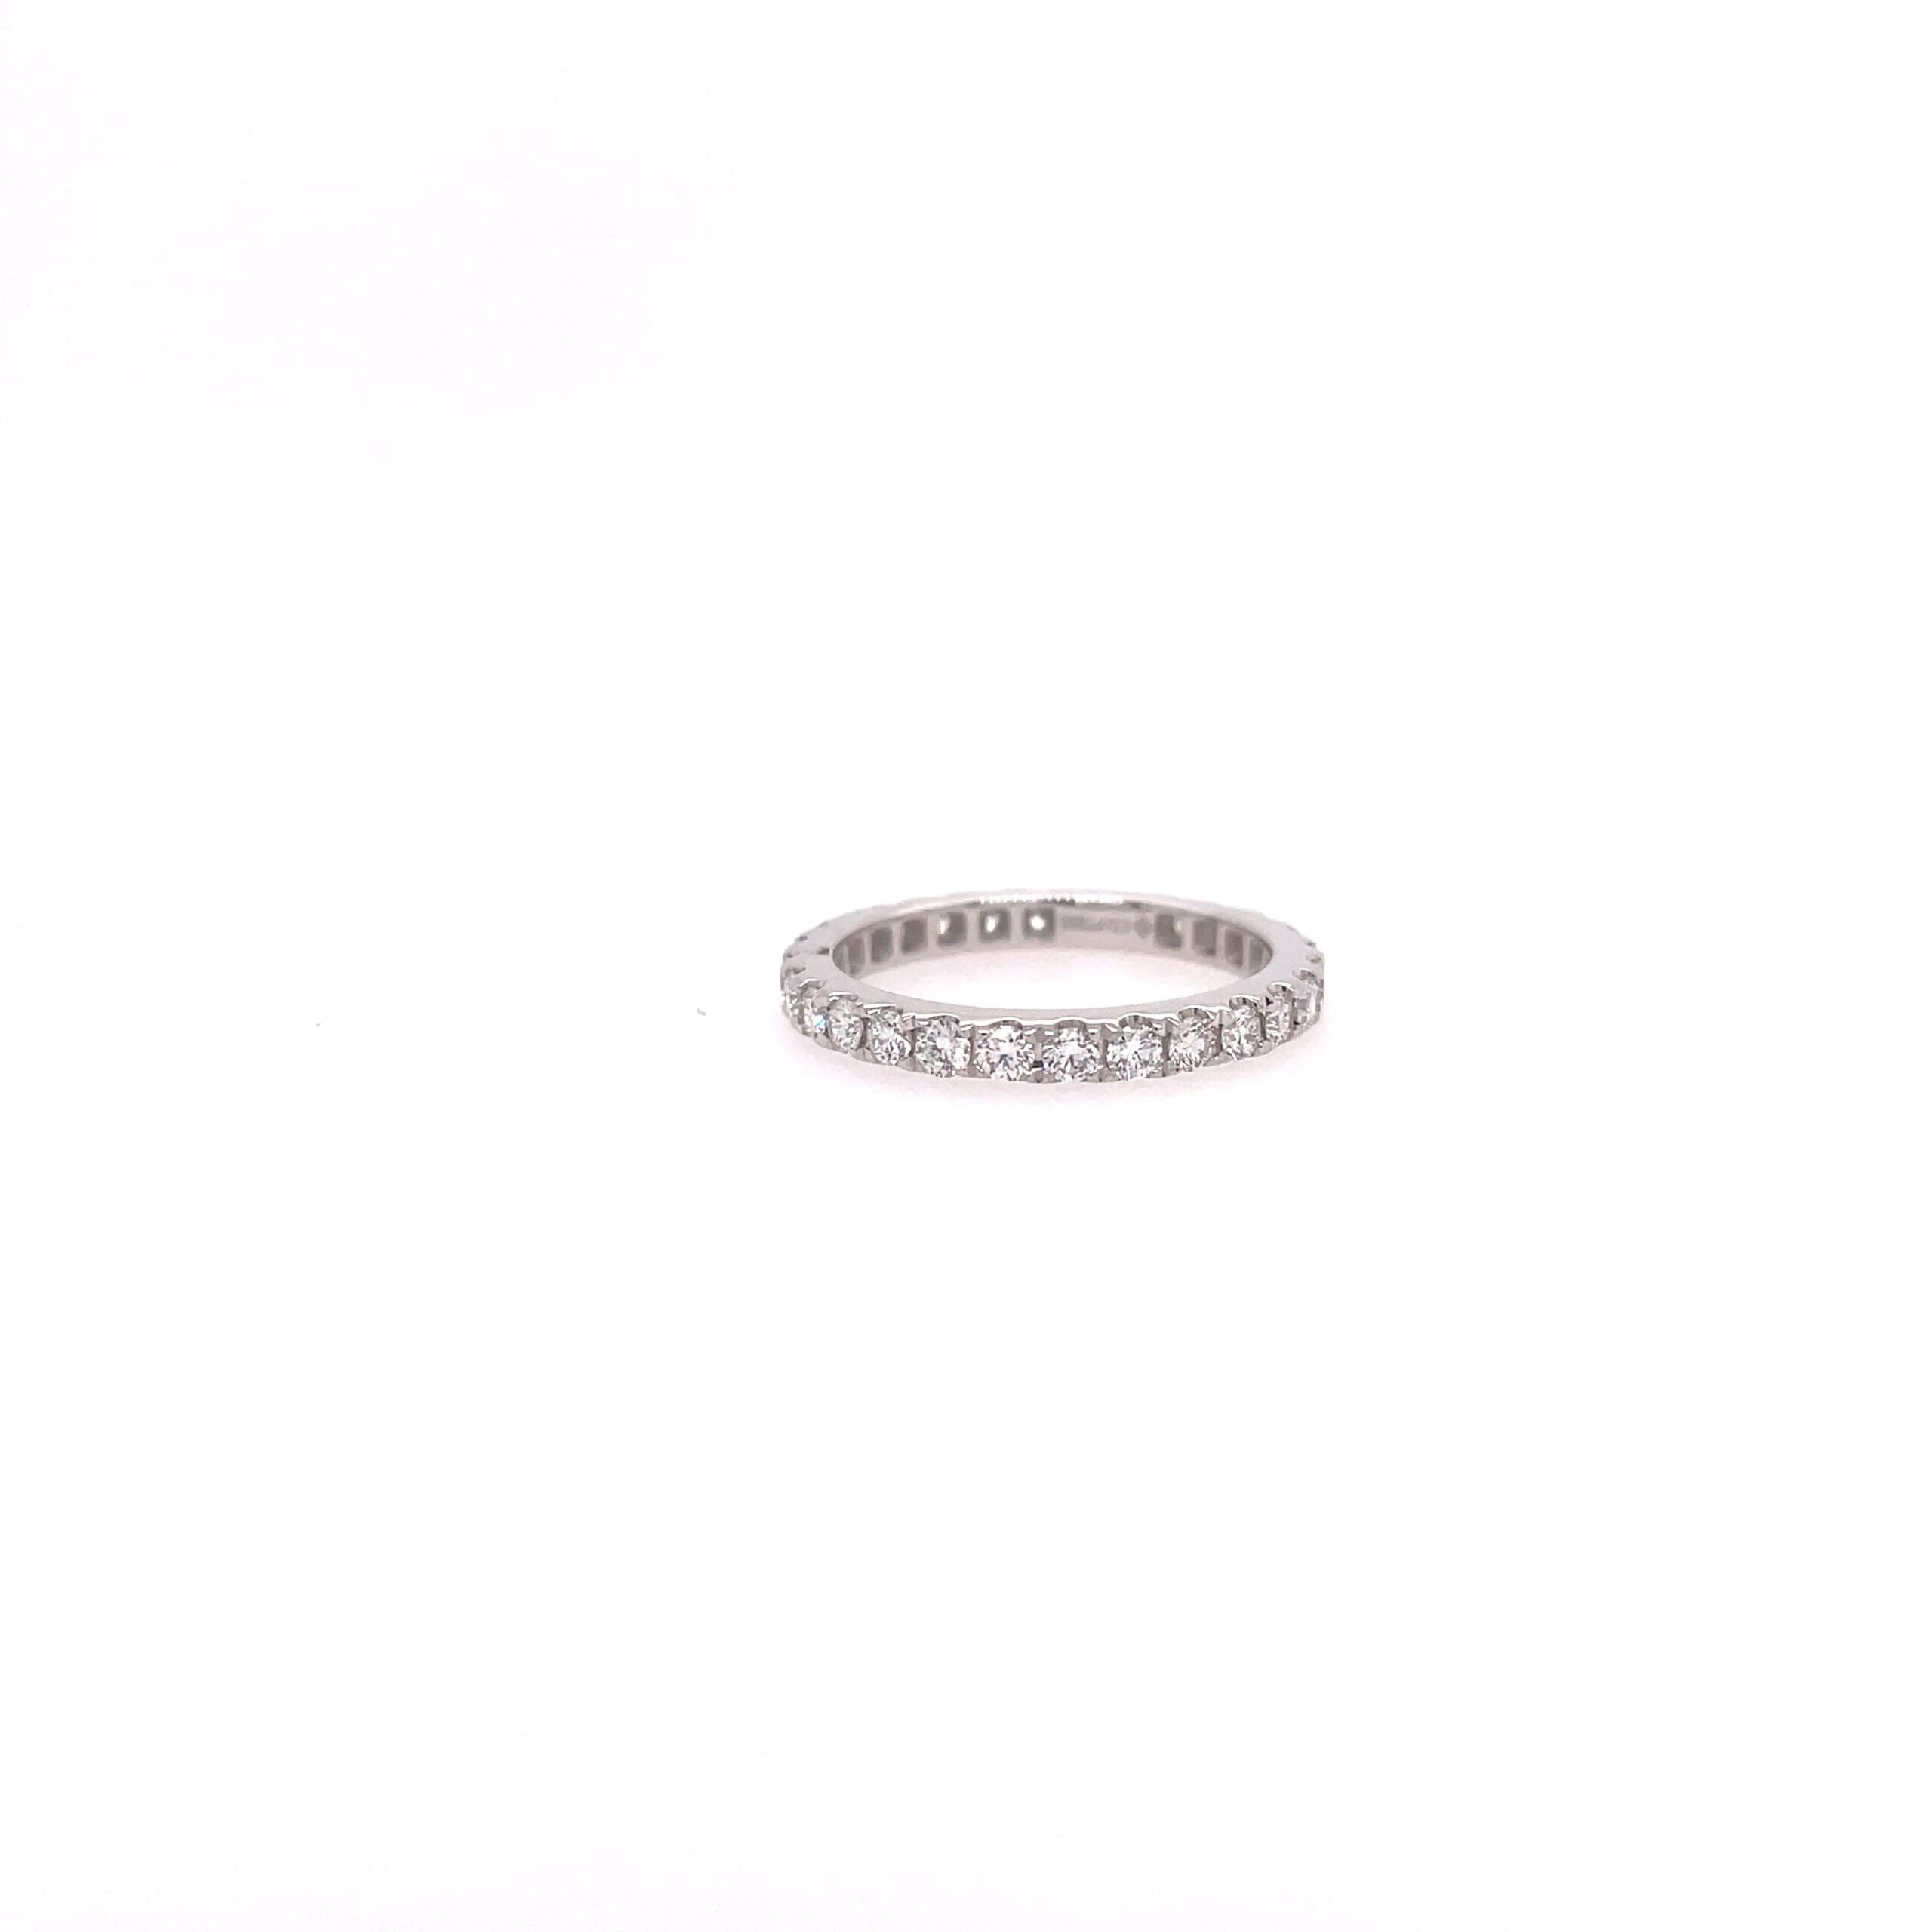 One white gold ring, the band filled with pave set round cut diamond, set againts on a white background and surfaced.